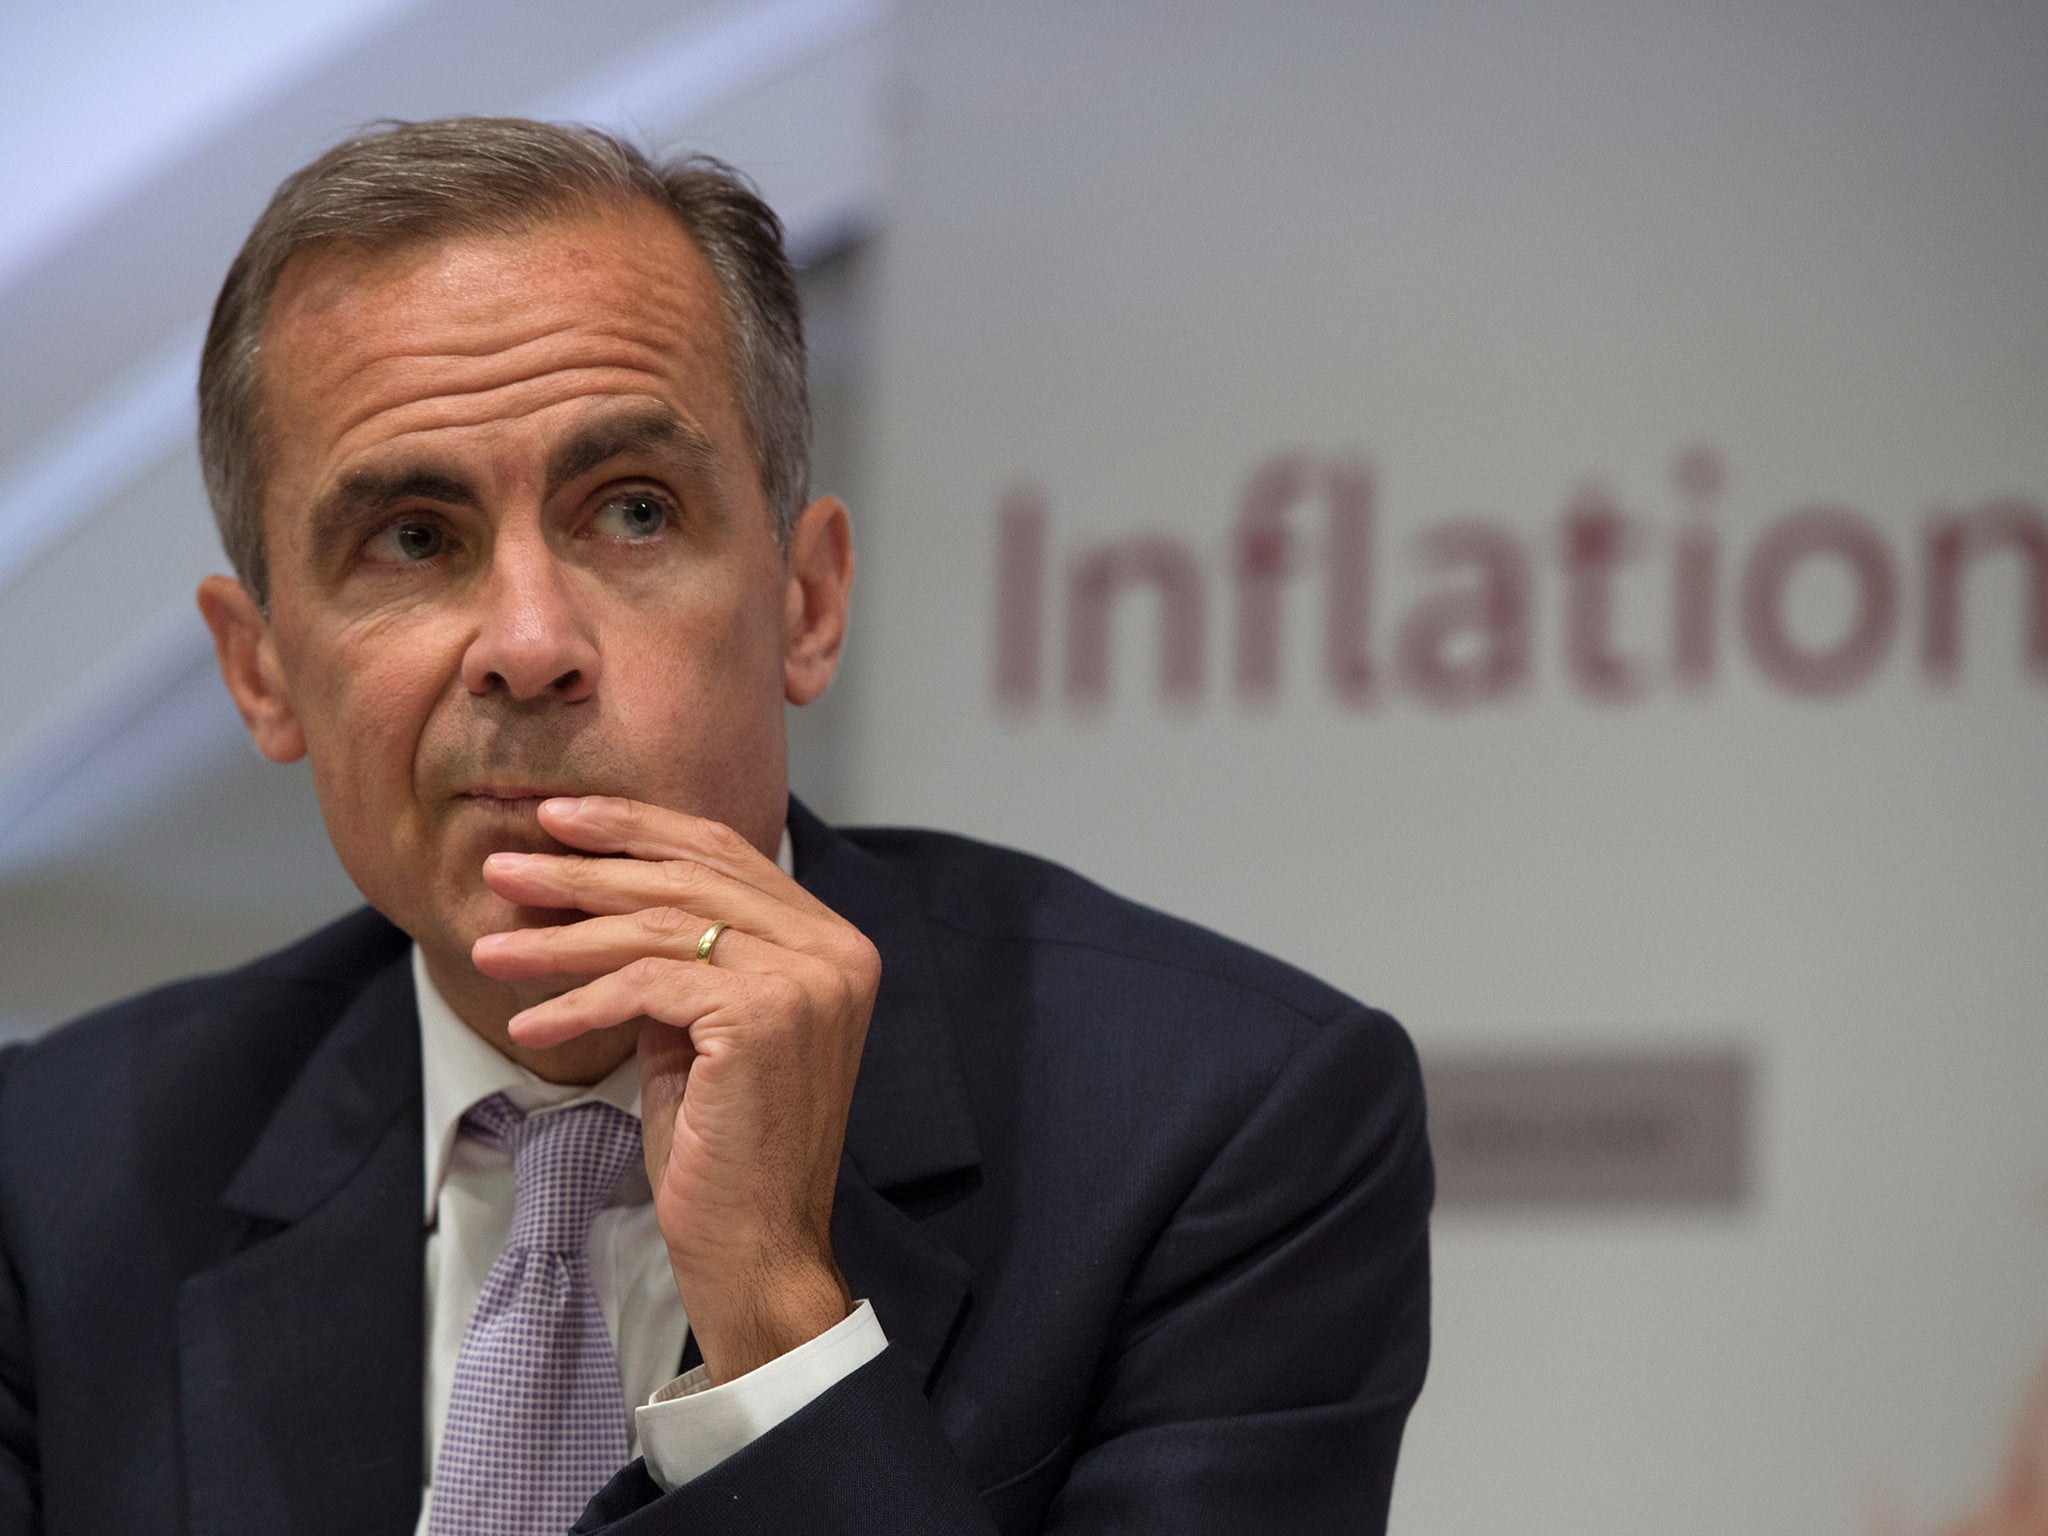 The Bank of England chief Mark Carney is not expected to increase interest rates until the middle of 2016